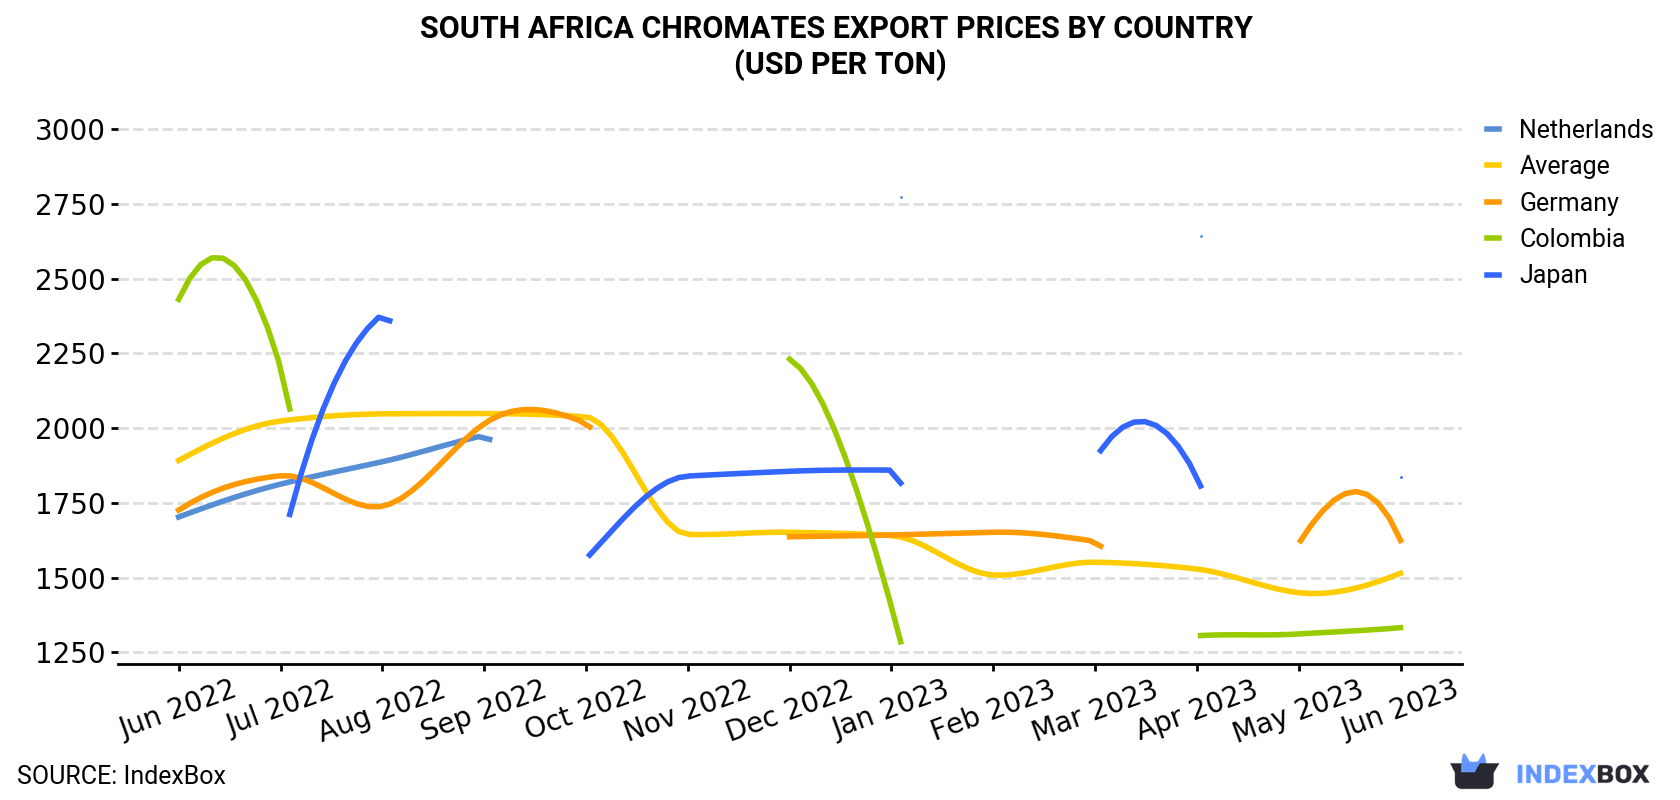 South Africa Chromates Export Prices By Country (USD Per Ton)